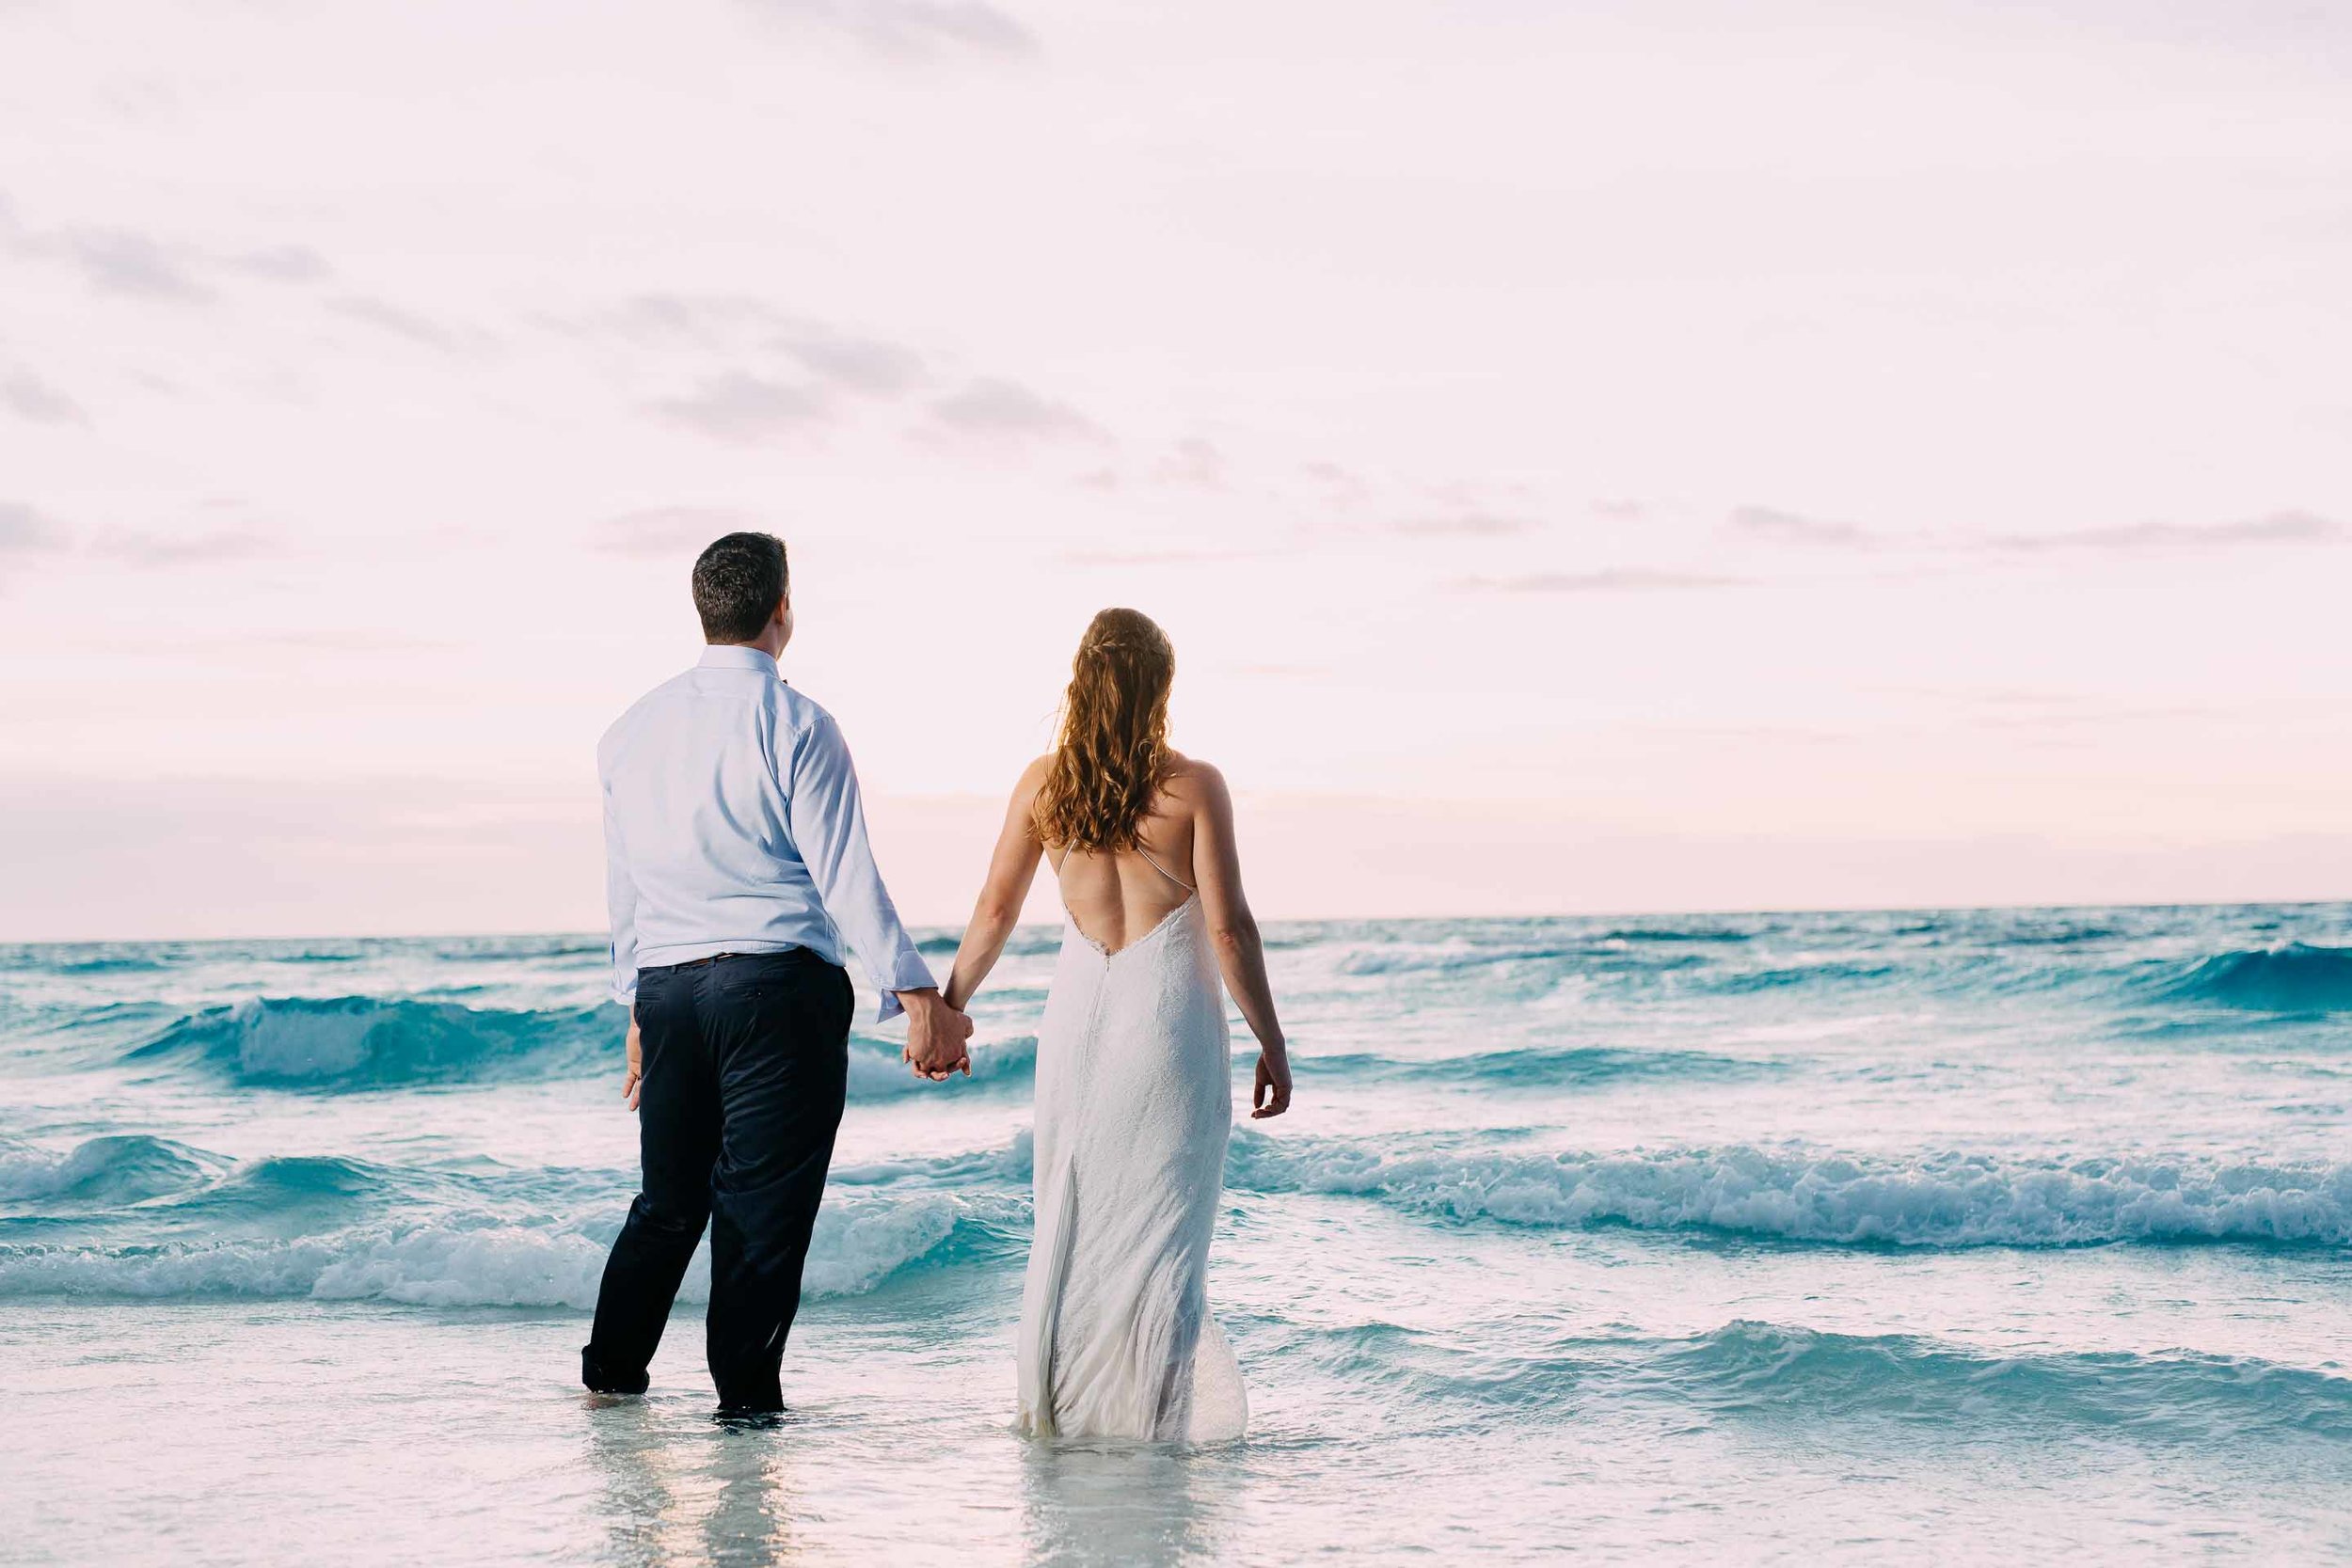 Newlyweds wade into the warm South Pacific Ocean moments after getting married on the sand quay. 